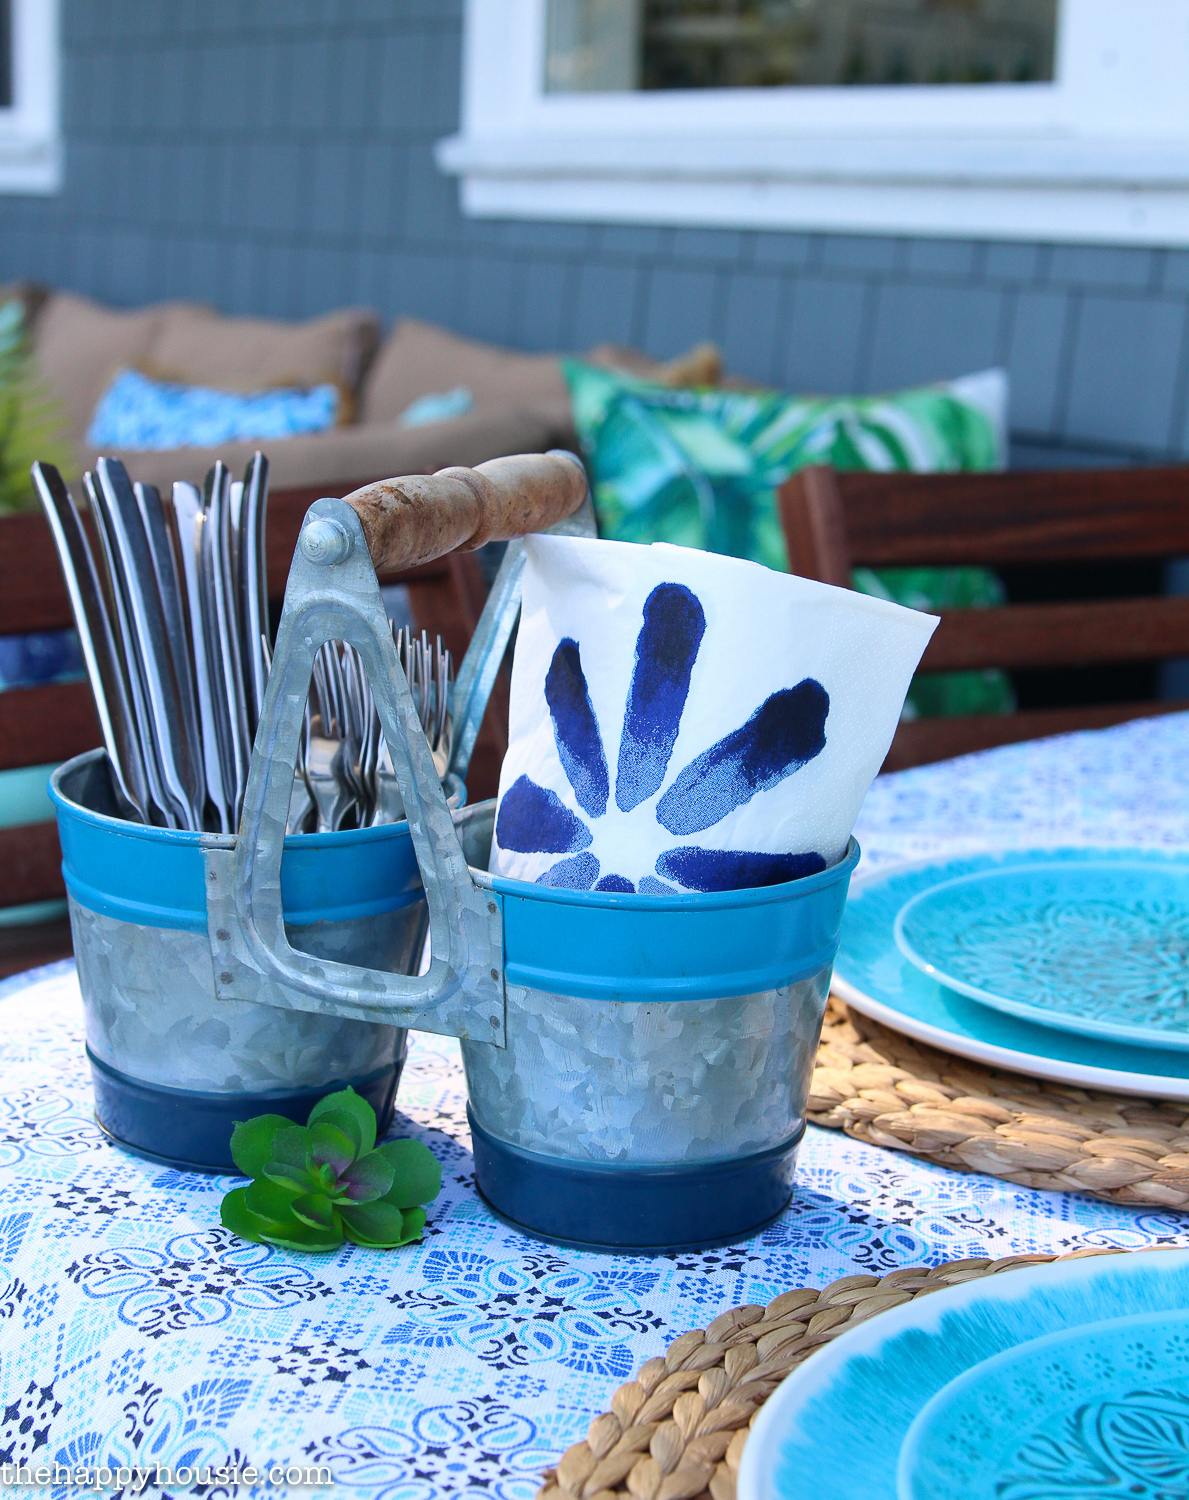 There is galvanized containers on the table that have cutlery in them.